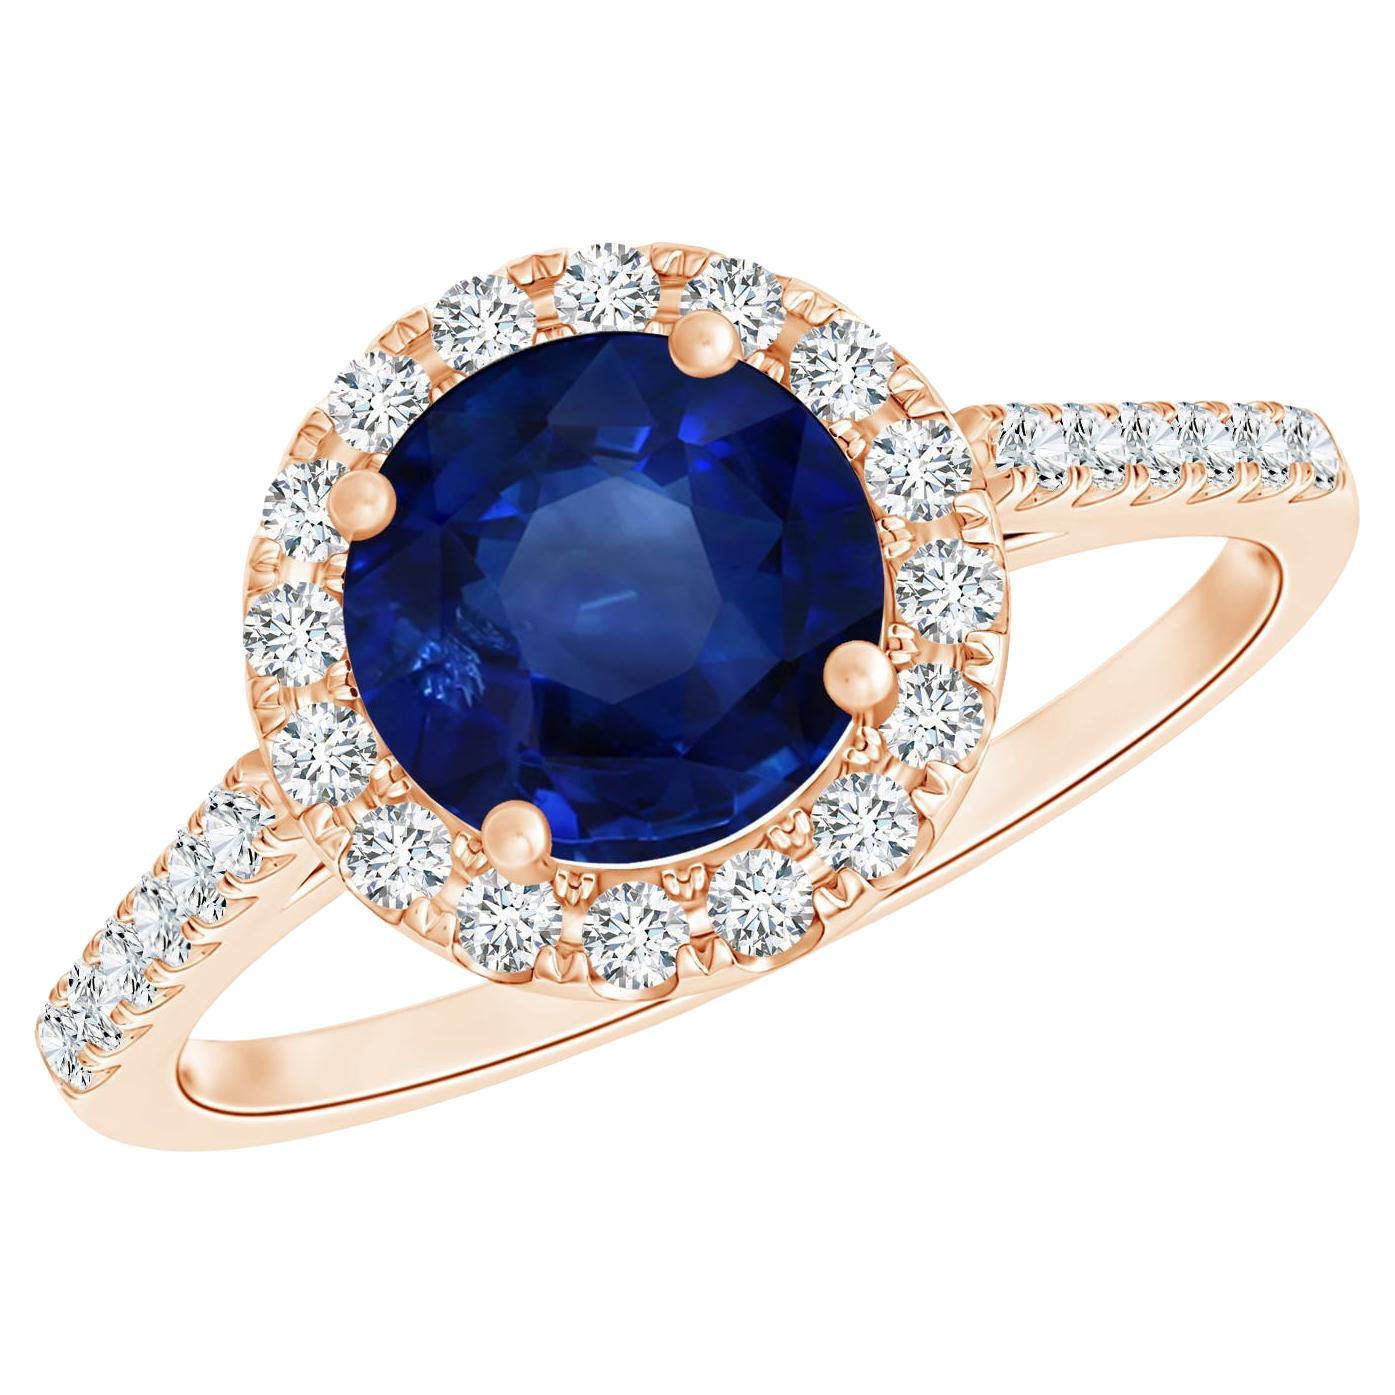 For Sale:  Angara Gia Certified Natural Round Sapphire Ring in Rose Gold with Diamond Halo